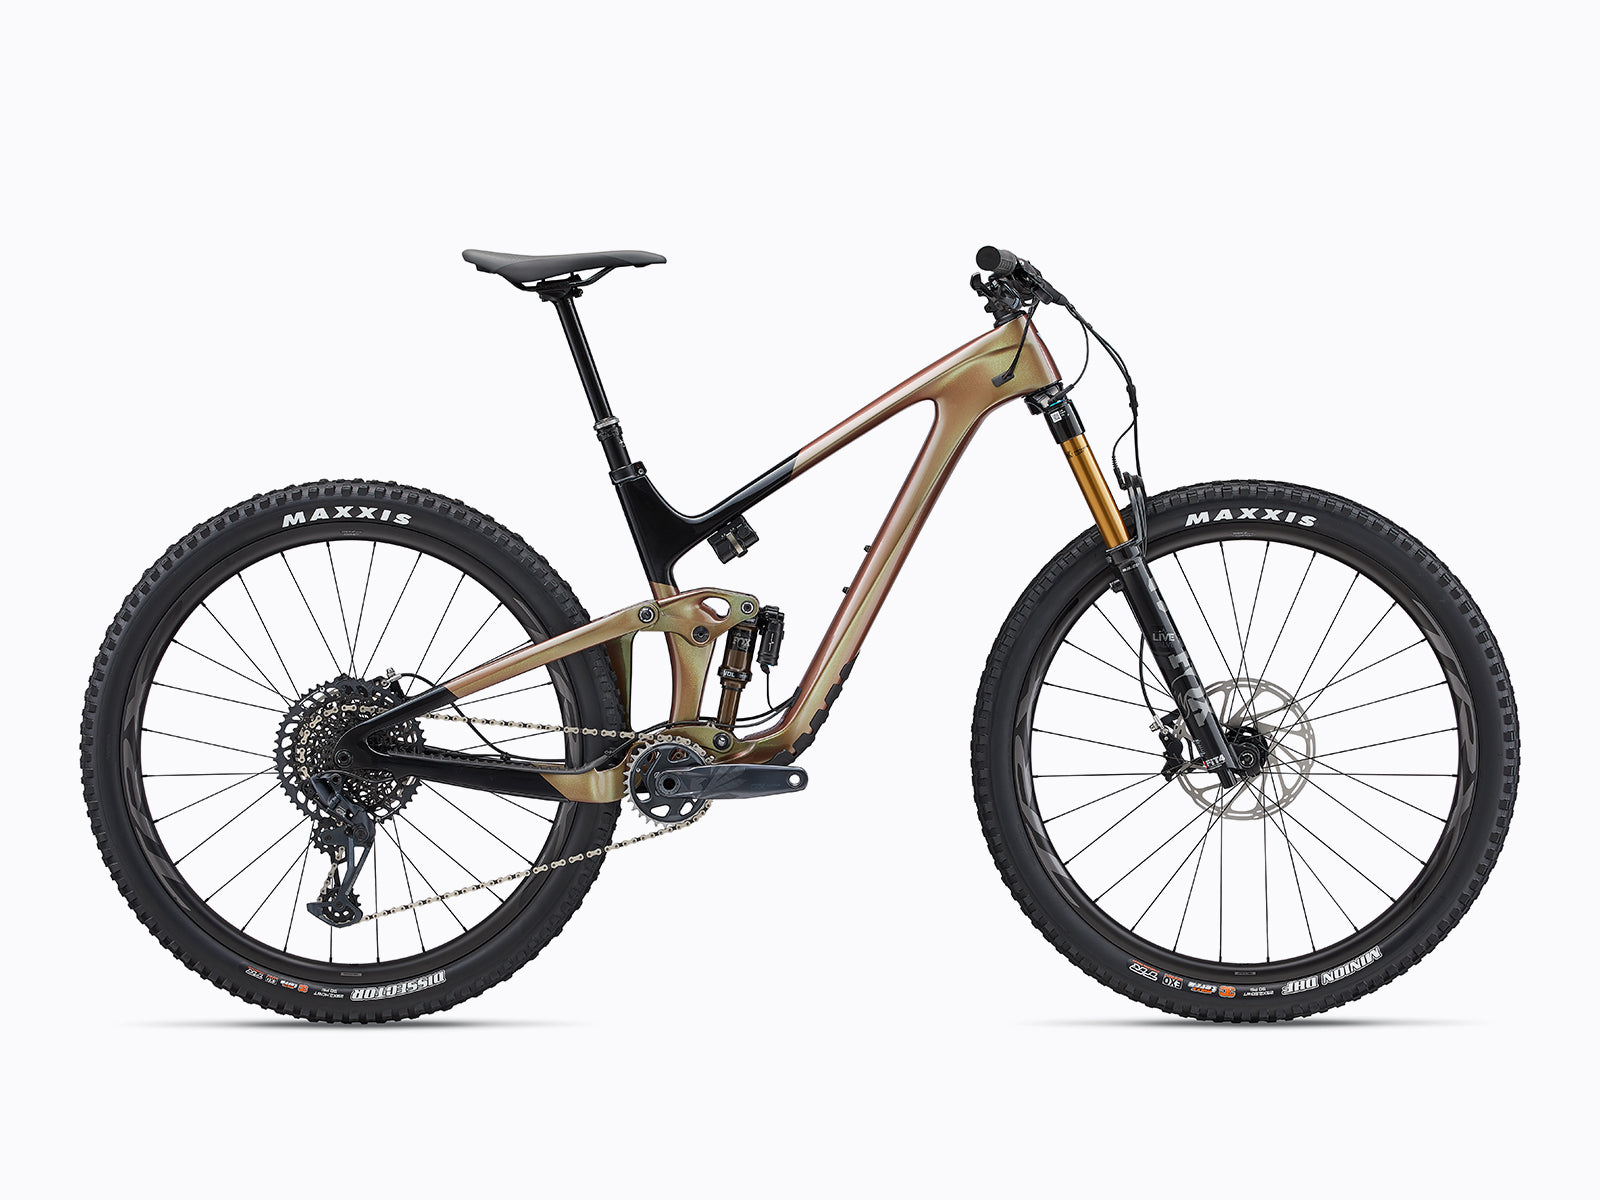 image features the Giant trance X advanced pro 29 1, a full suspension mountain bike. Now available at Giant Melbourne, an Australian bike shop. 